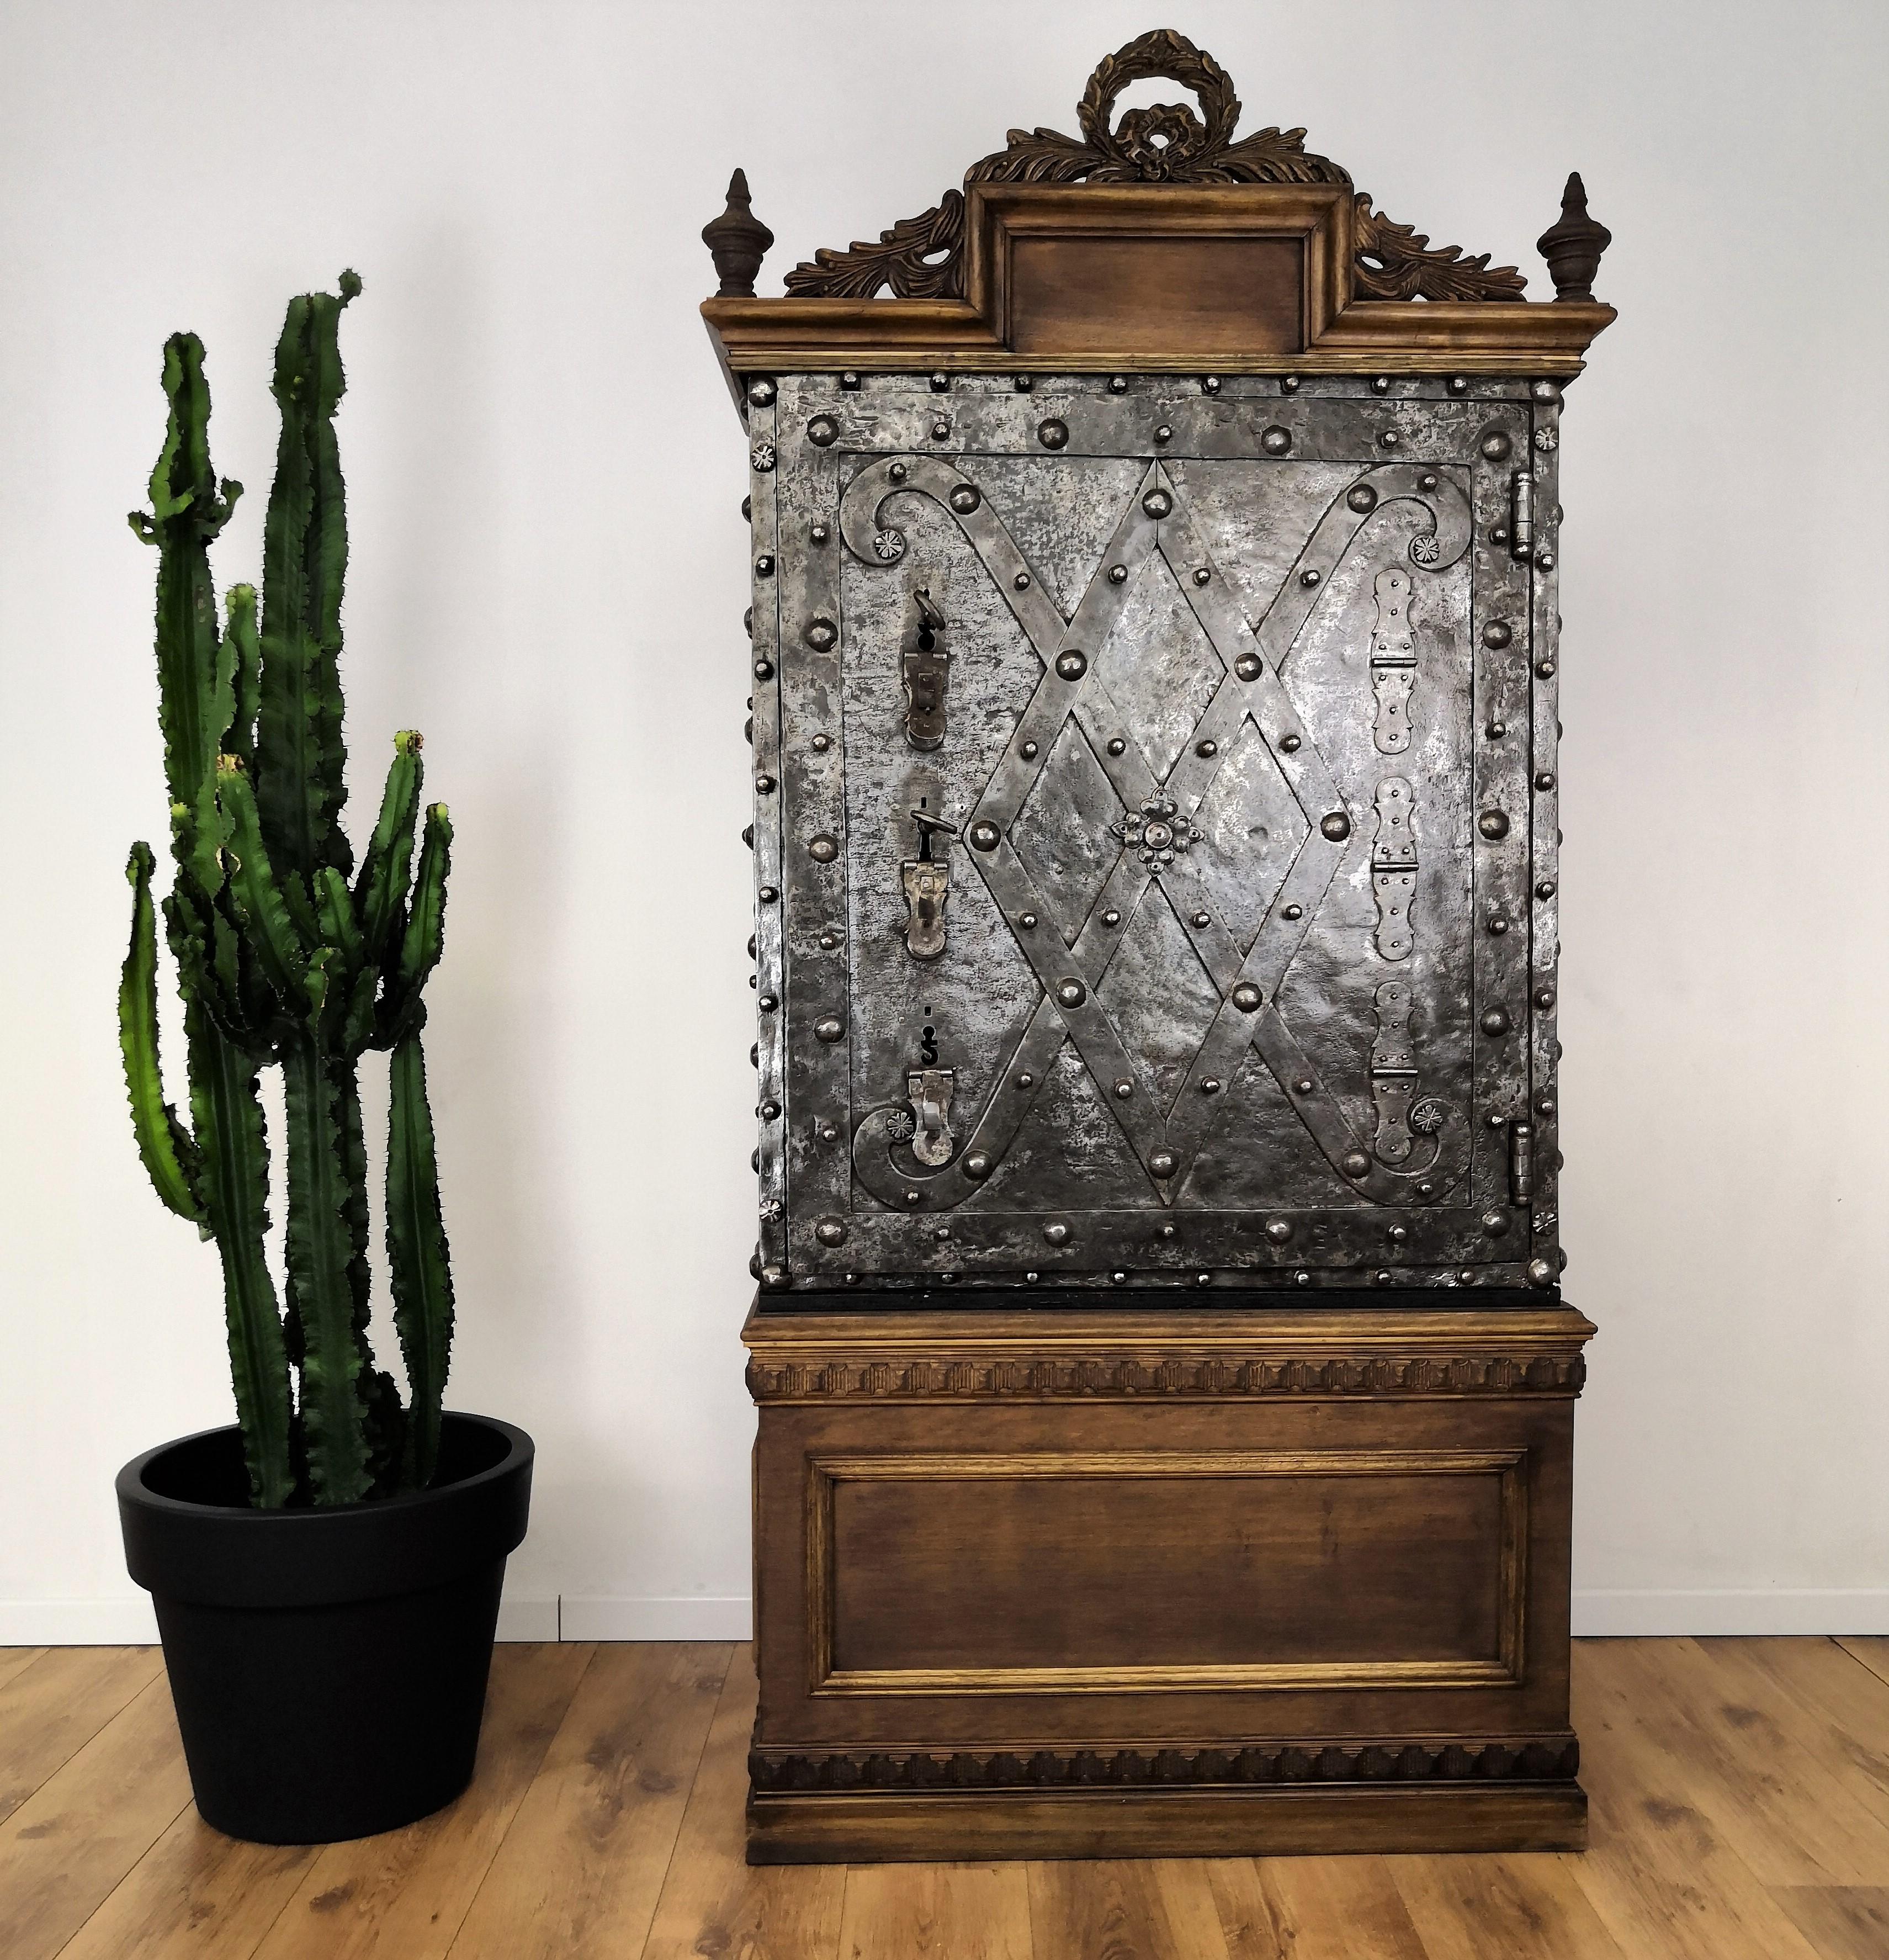 Late 18th century Northern Italian forged wrought iron antique safe with typical all-around external hobnails and beautiful decorations on the front door with its wooden base and top.
The opening mechanism works with two authentic and amazingly